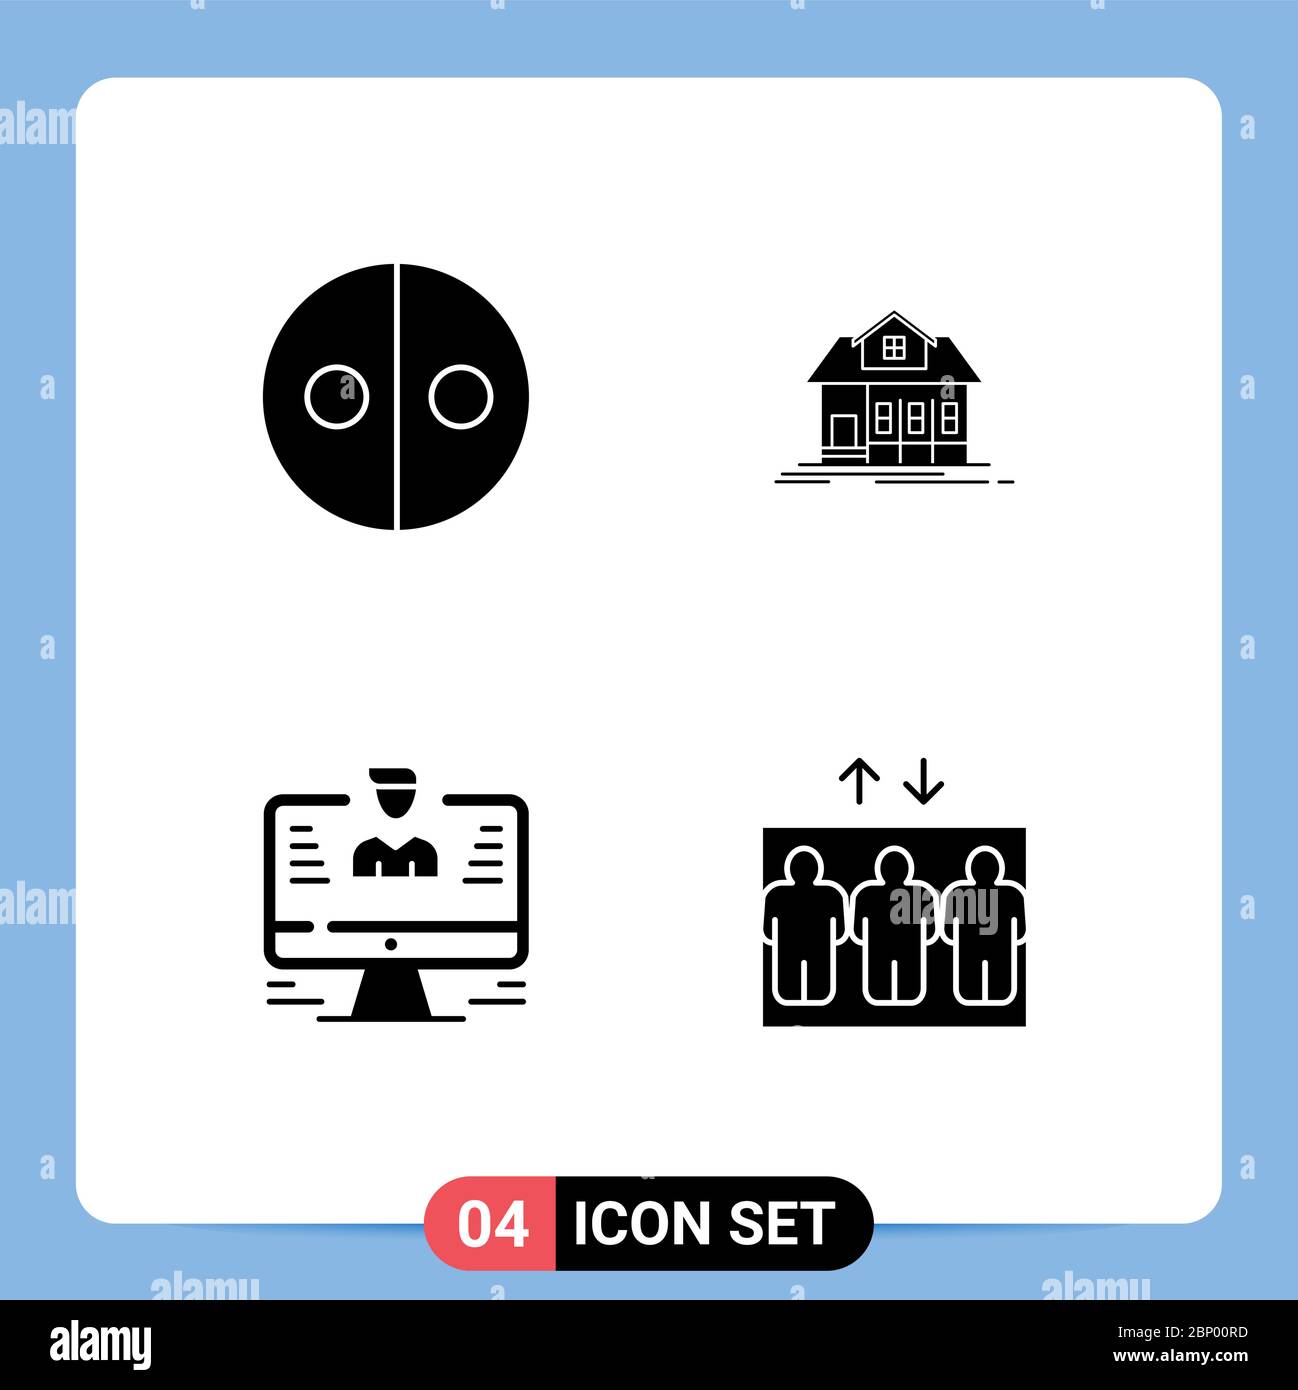 Group of 4 Solid Glyphs Signs and Symbols for equality, computer, symbols, building, report Editable Vector Design Elements Stock Vector